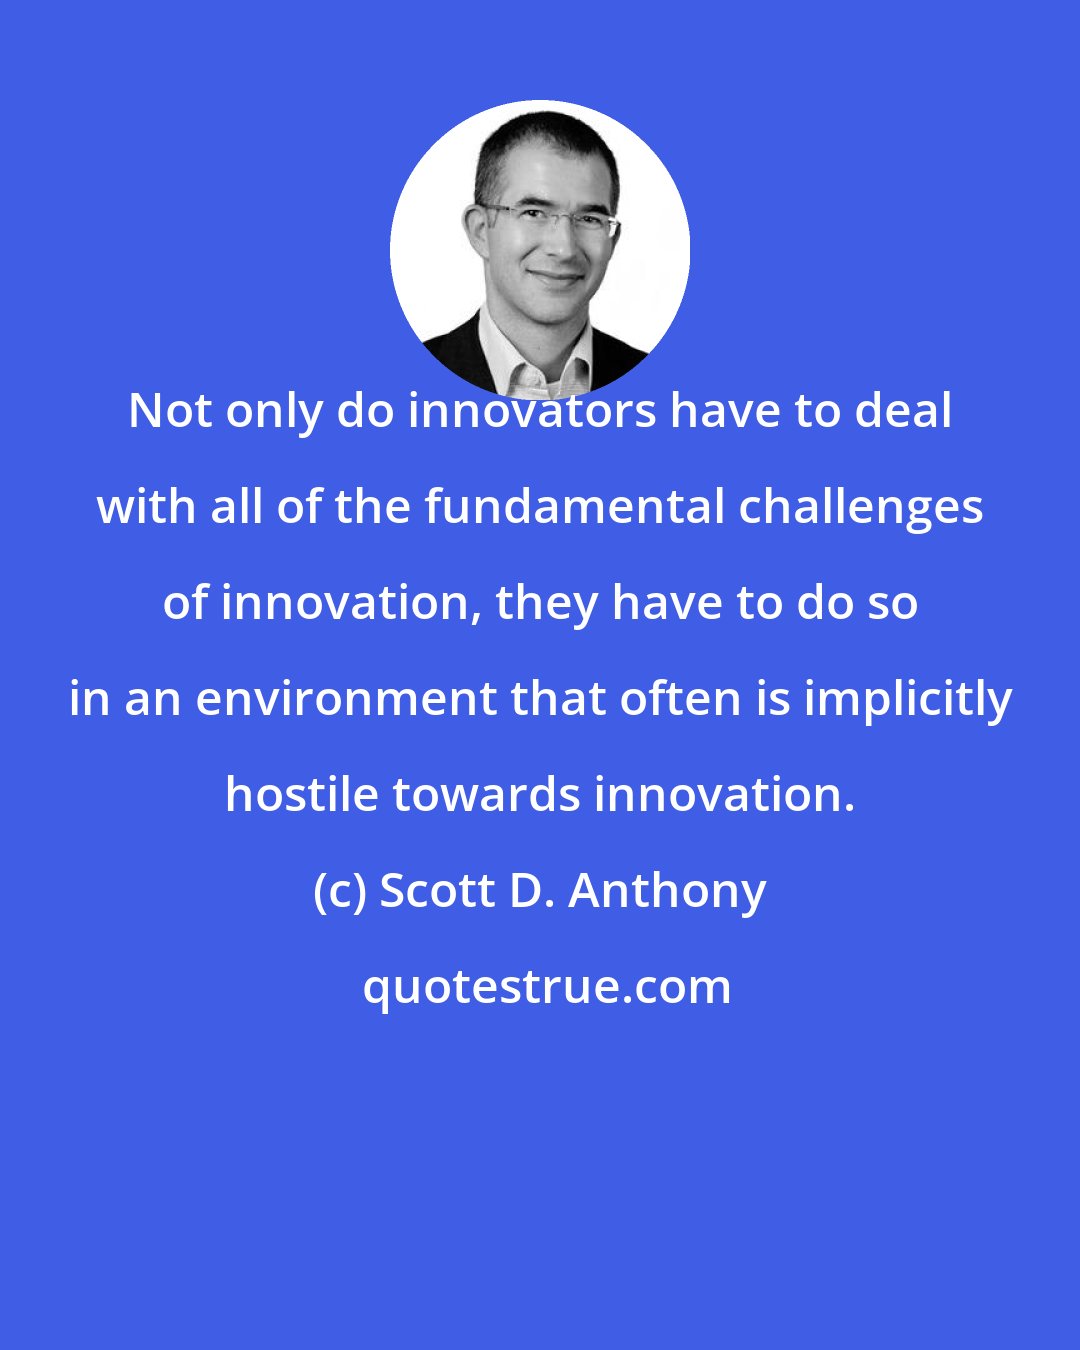 Scott D. Anthony: Not only do innovators have to deal with all of the fundamental challenges of innovation, they have to do so in an environment that often is implicitly hostile towards innovation.